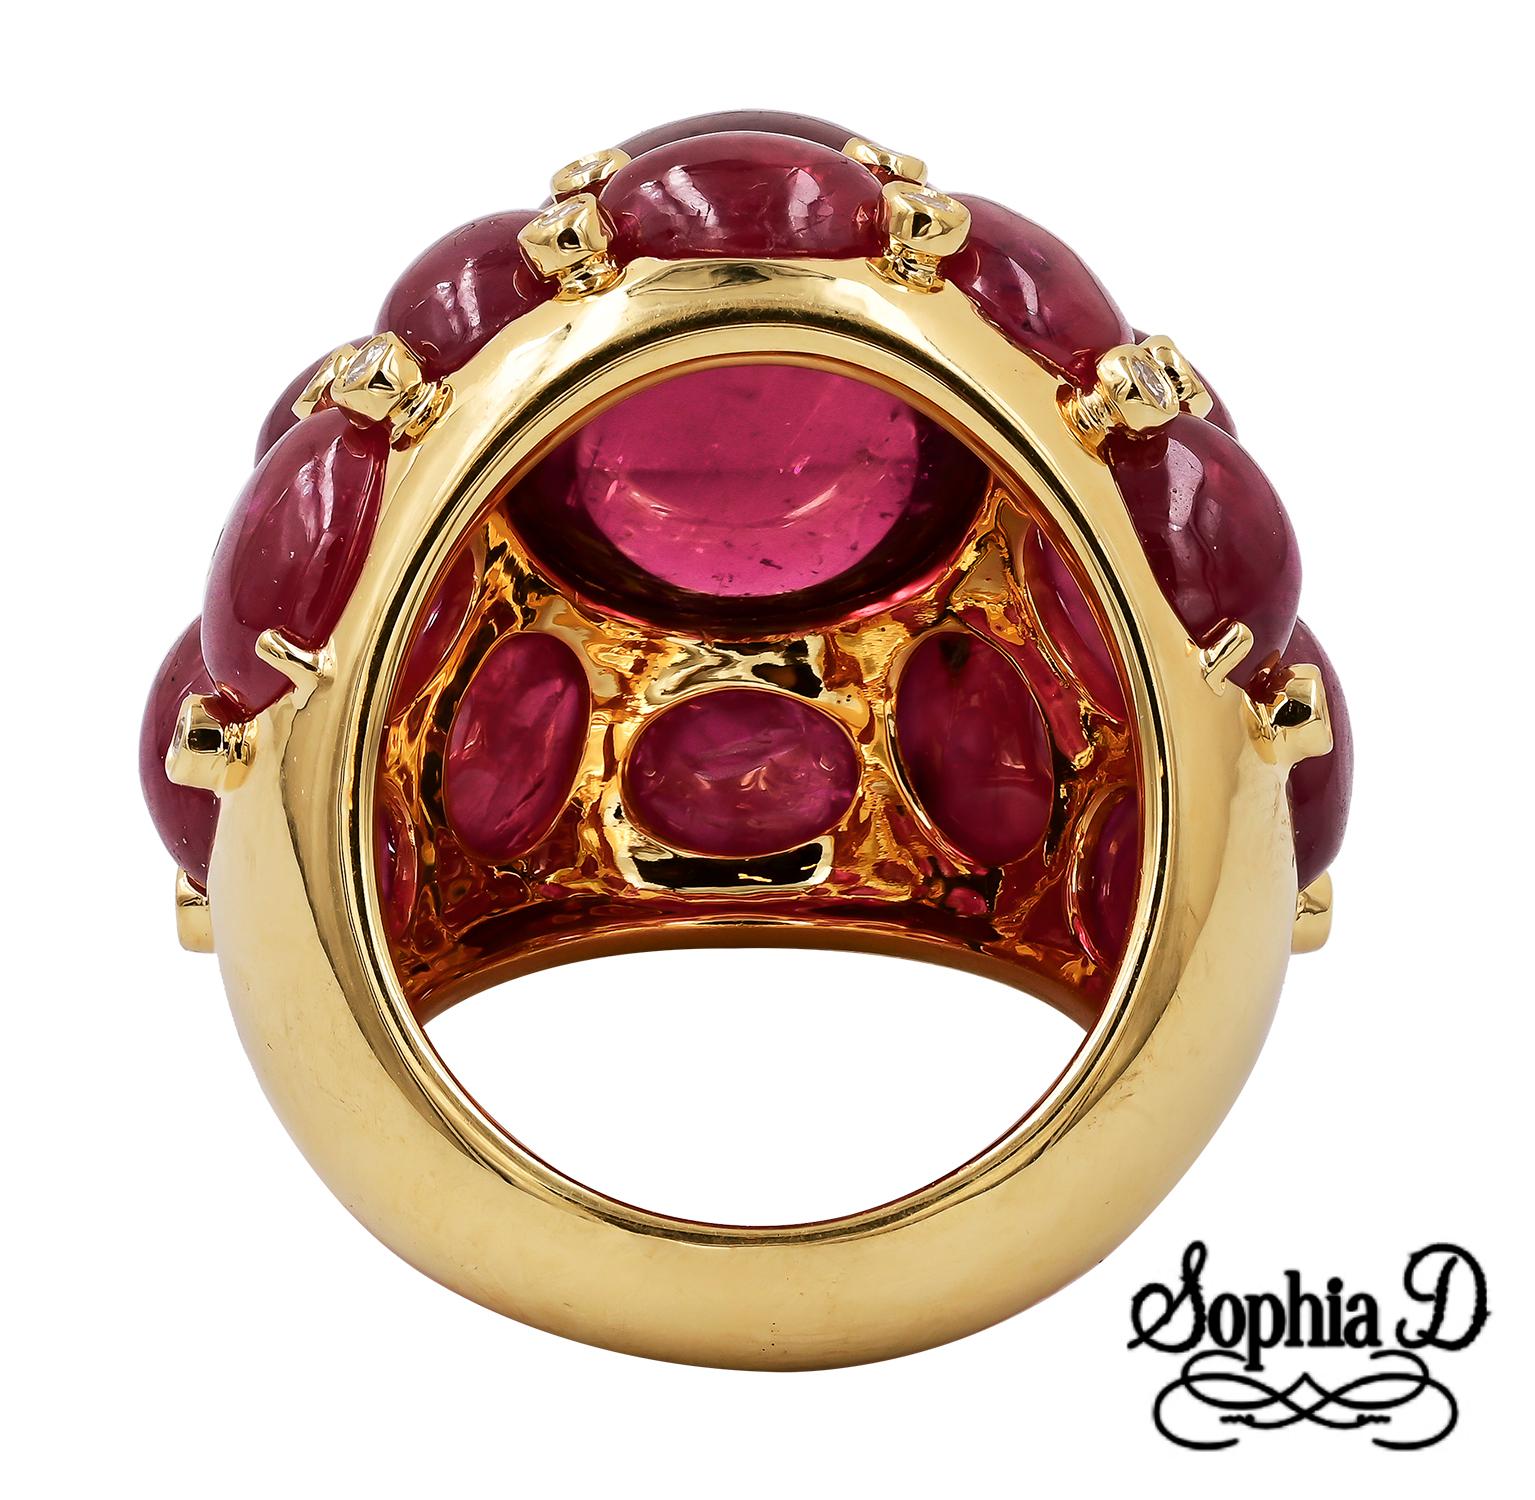 Art Deco Sophia D. 25.06 Carat Ruby, Tourmaline and Diamond Cocktail Ring For Sale